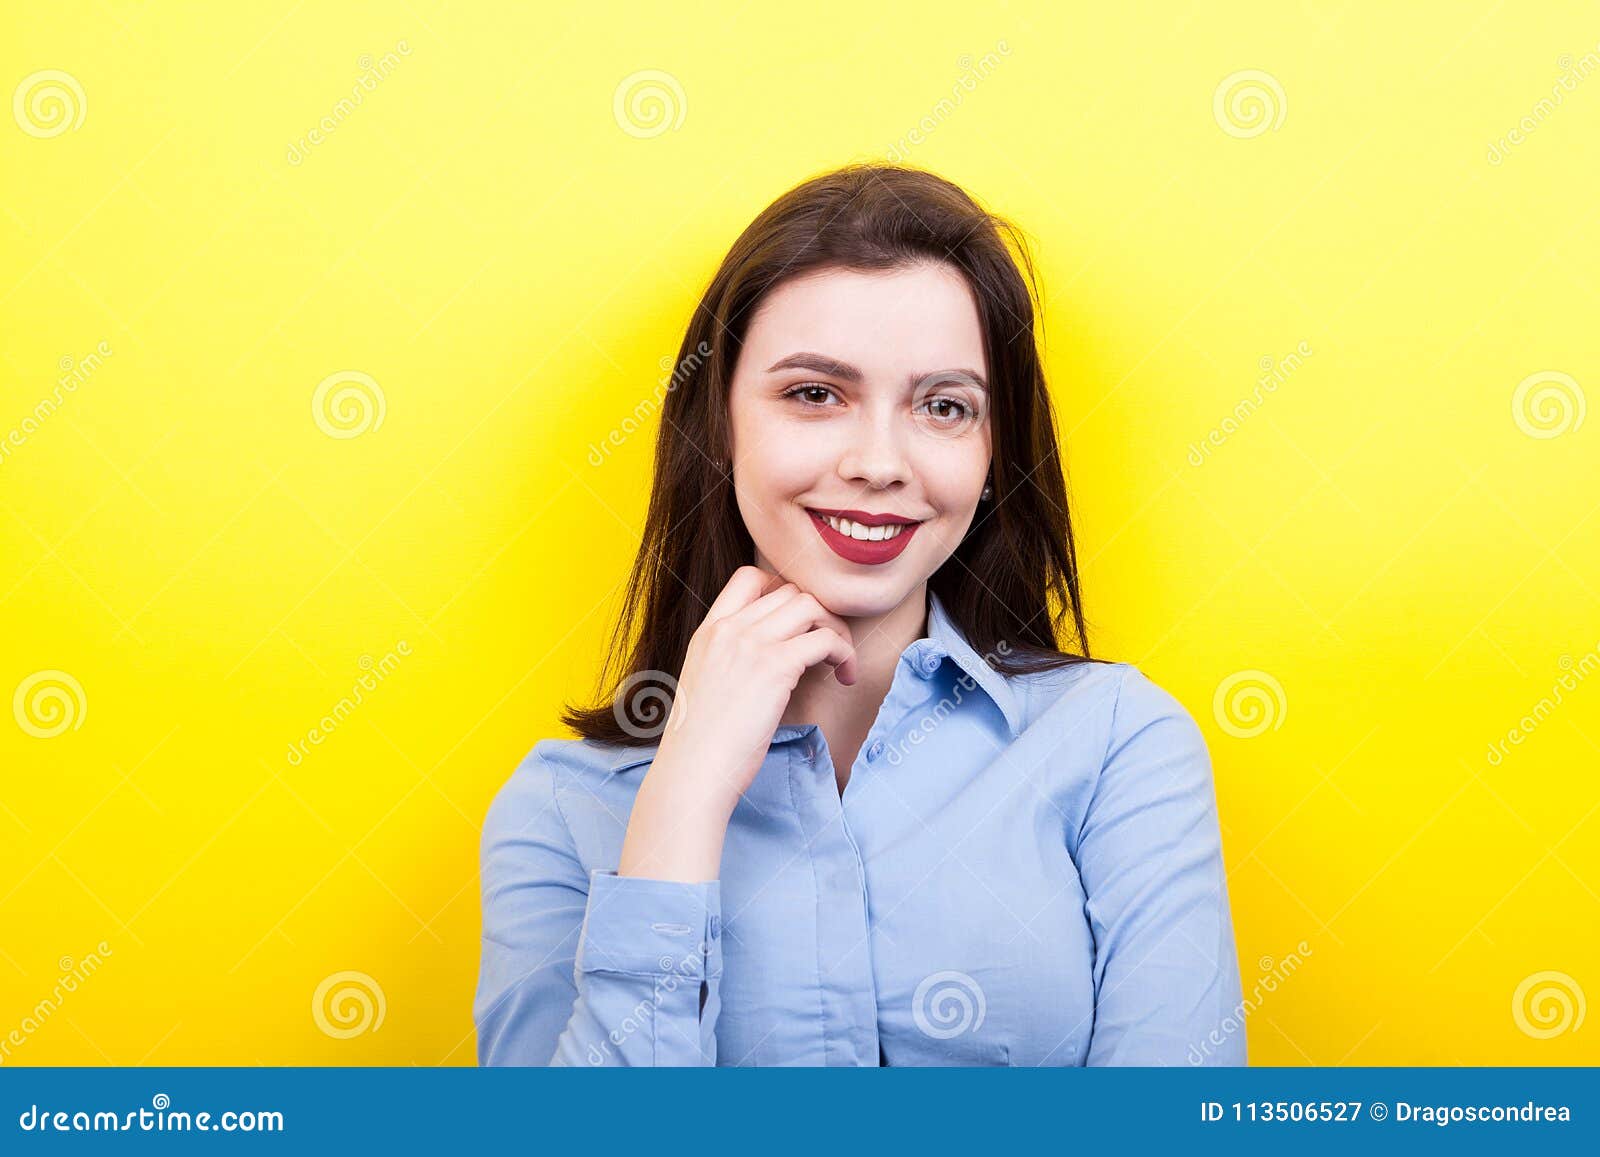 Portrait of Smiling Woman Wearing a Business Blue Shirt Stock Image ...